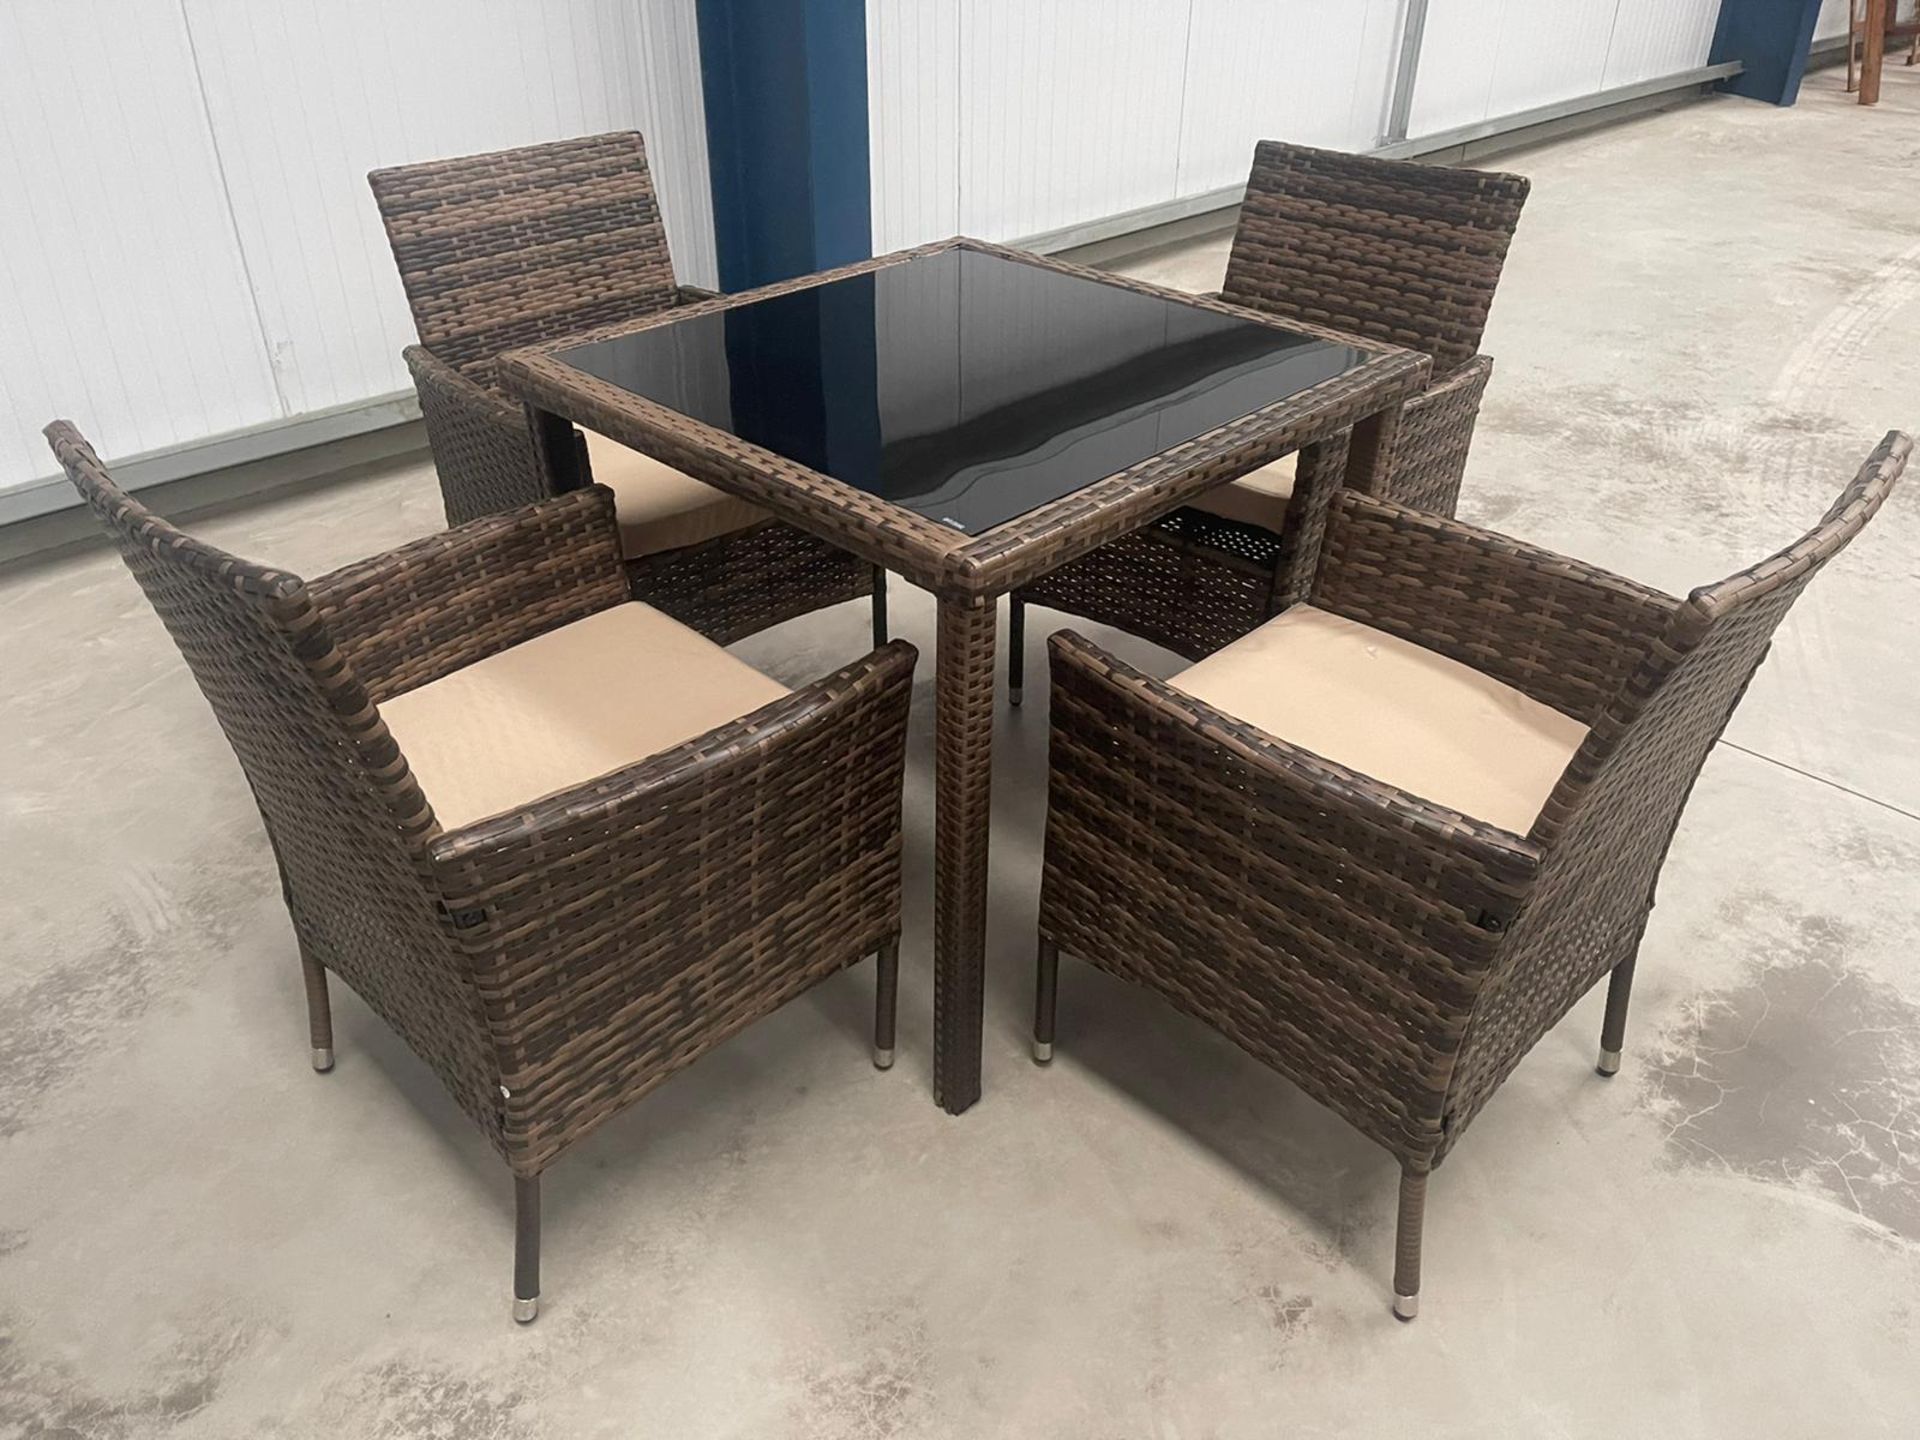 RRP £749 - NEW BROWN DINING SET WITH FOUR CHAIRS - LUXURY BLACK GLASS TOPPED DINING TABLE AND METAL